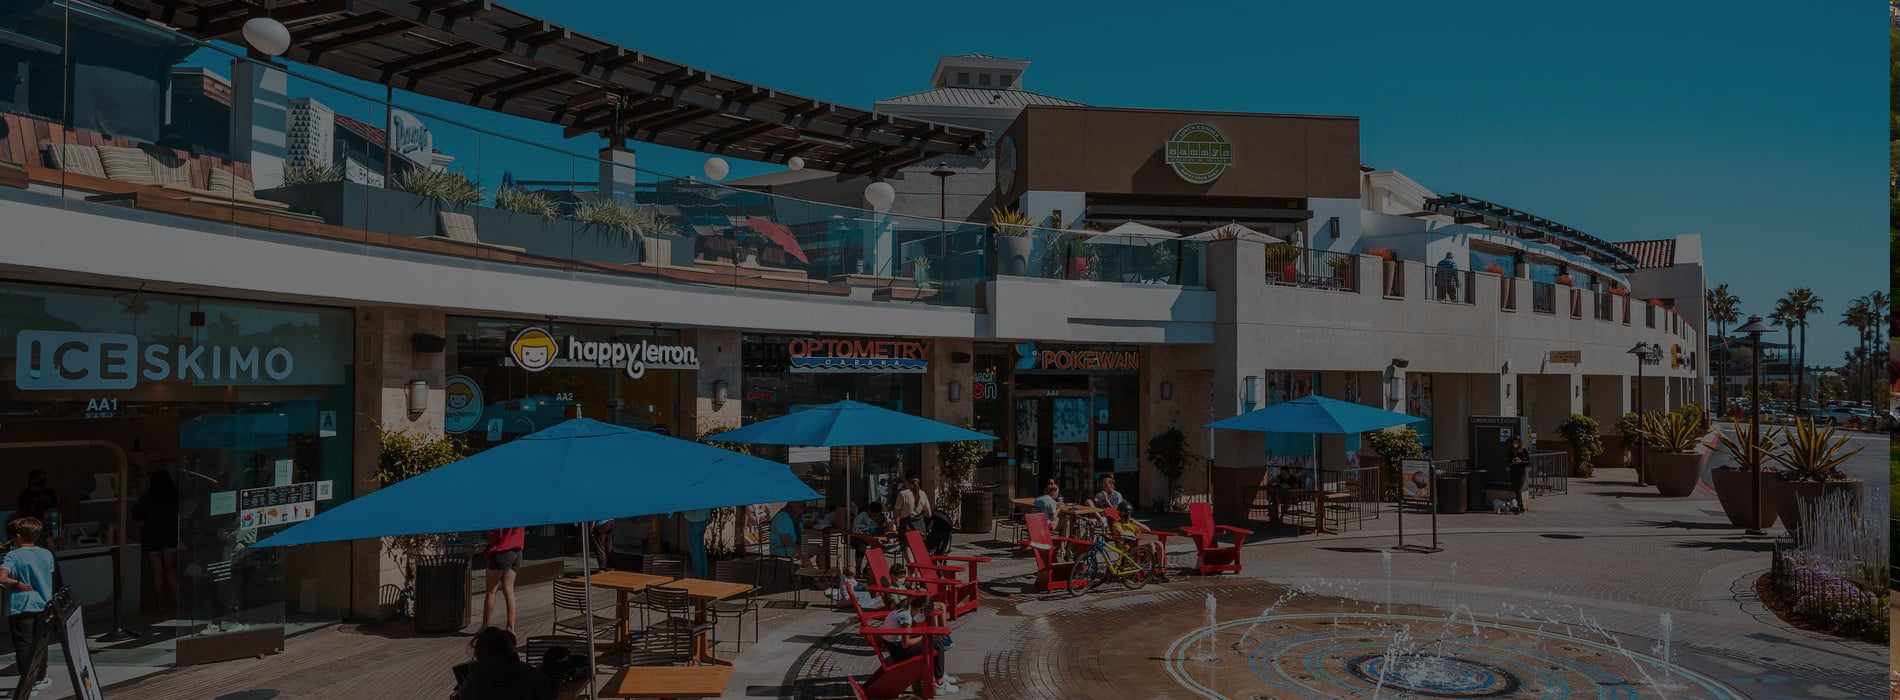 Del Mar Highlands Town Center in Carmel Valley. Discover homes for sale opportunities with the best real estate agents!